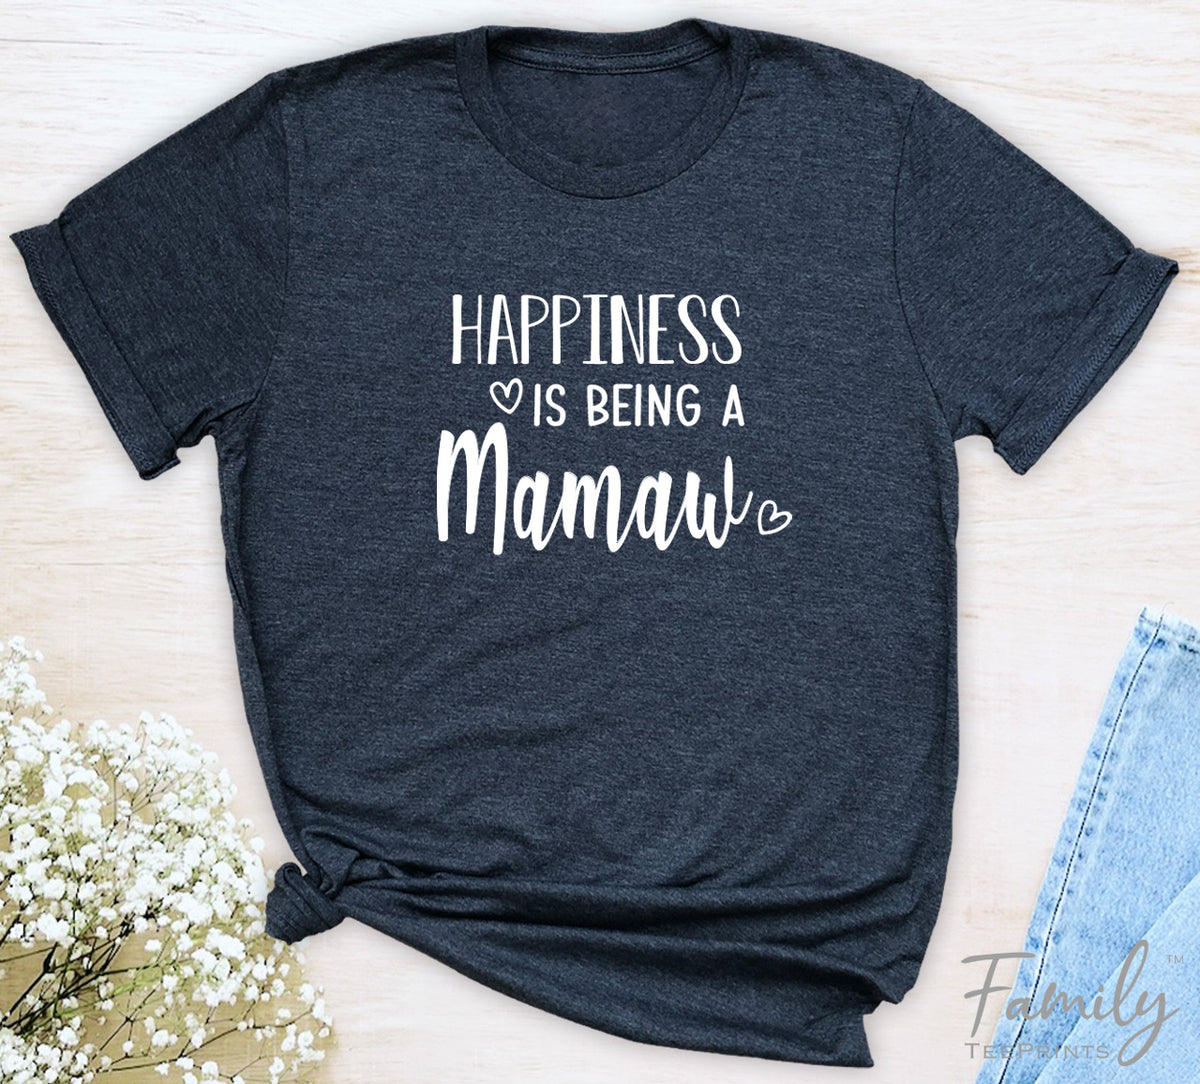 Happiness Is Being A Mamaw - Unisex T-shirt - Mamaw Shirt - Gift For Mamaw - familyteeprints